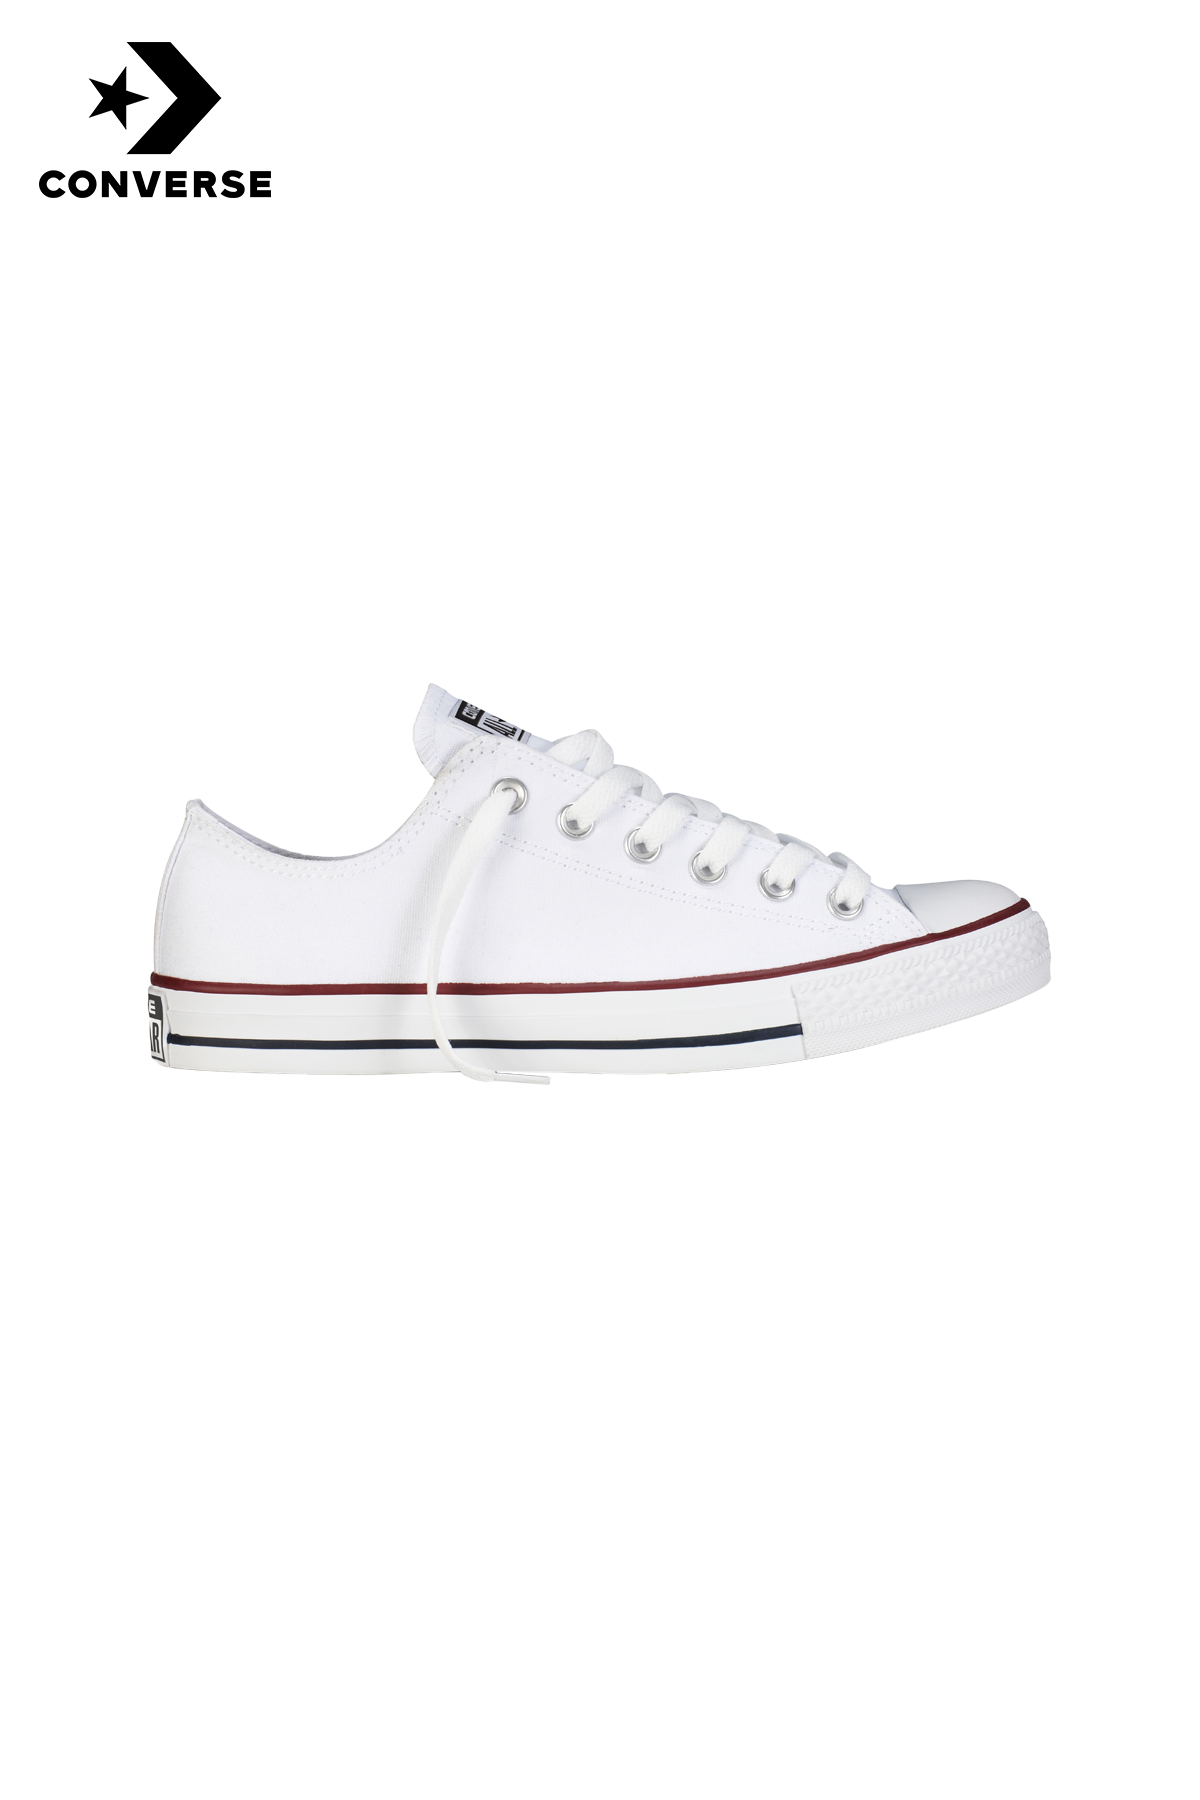 order converse all stars online